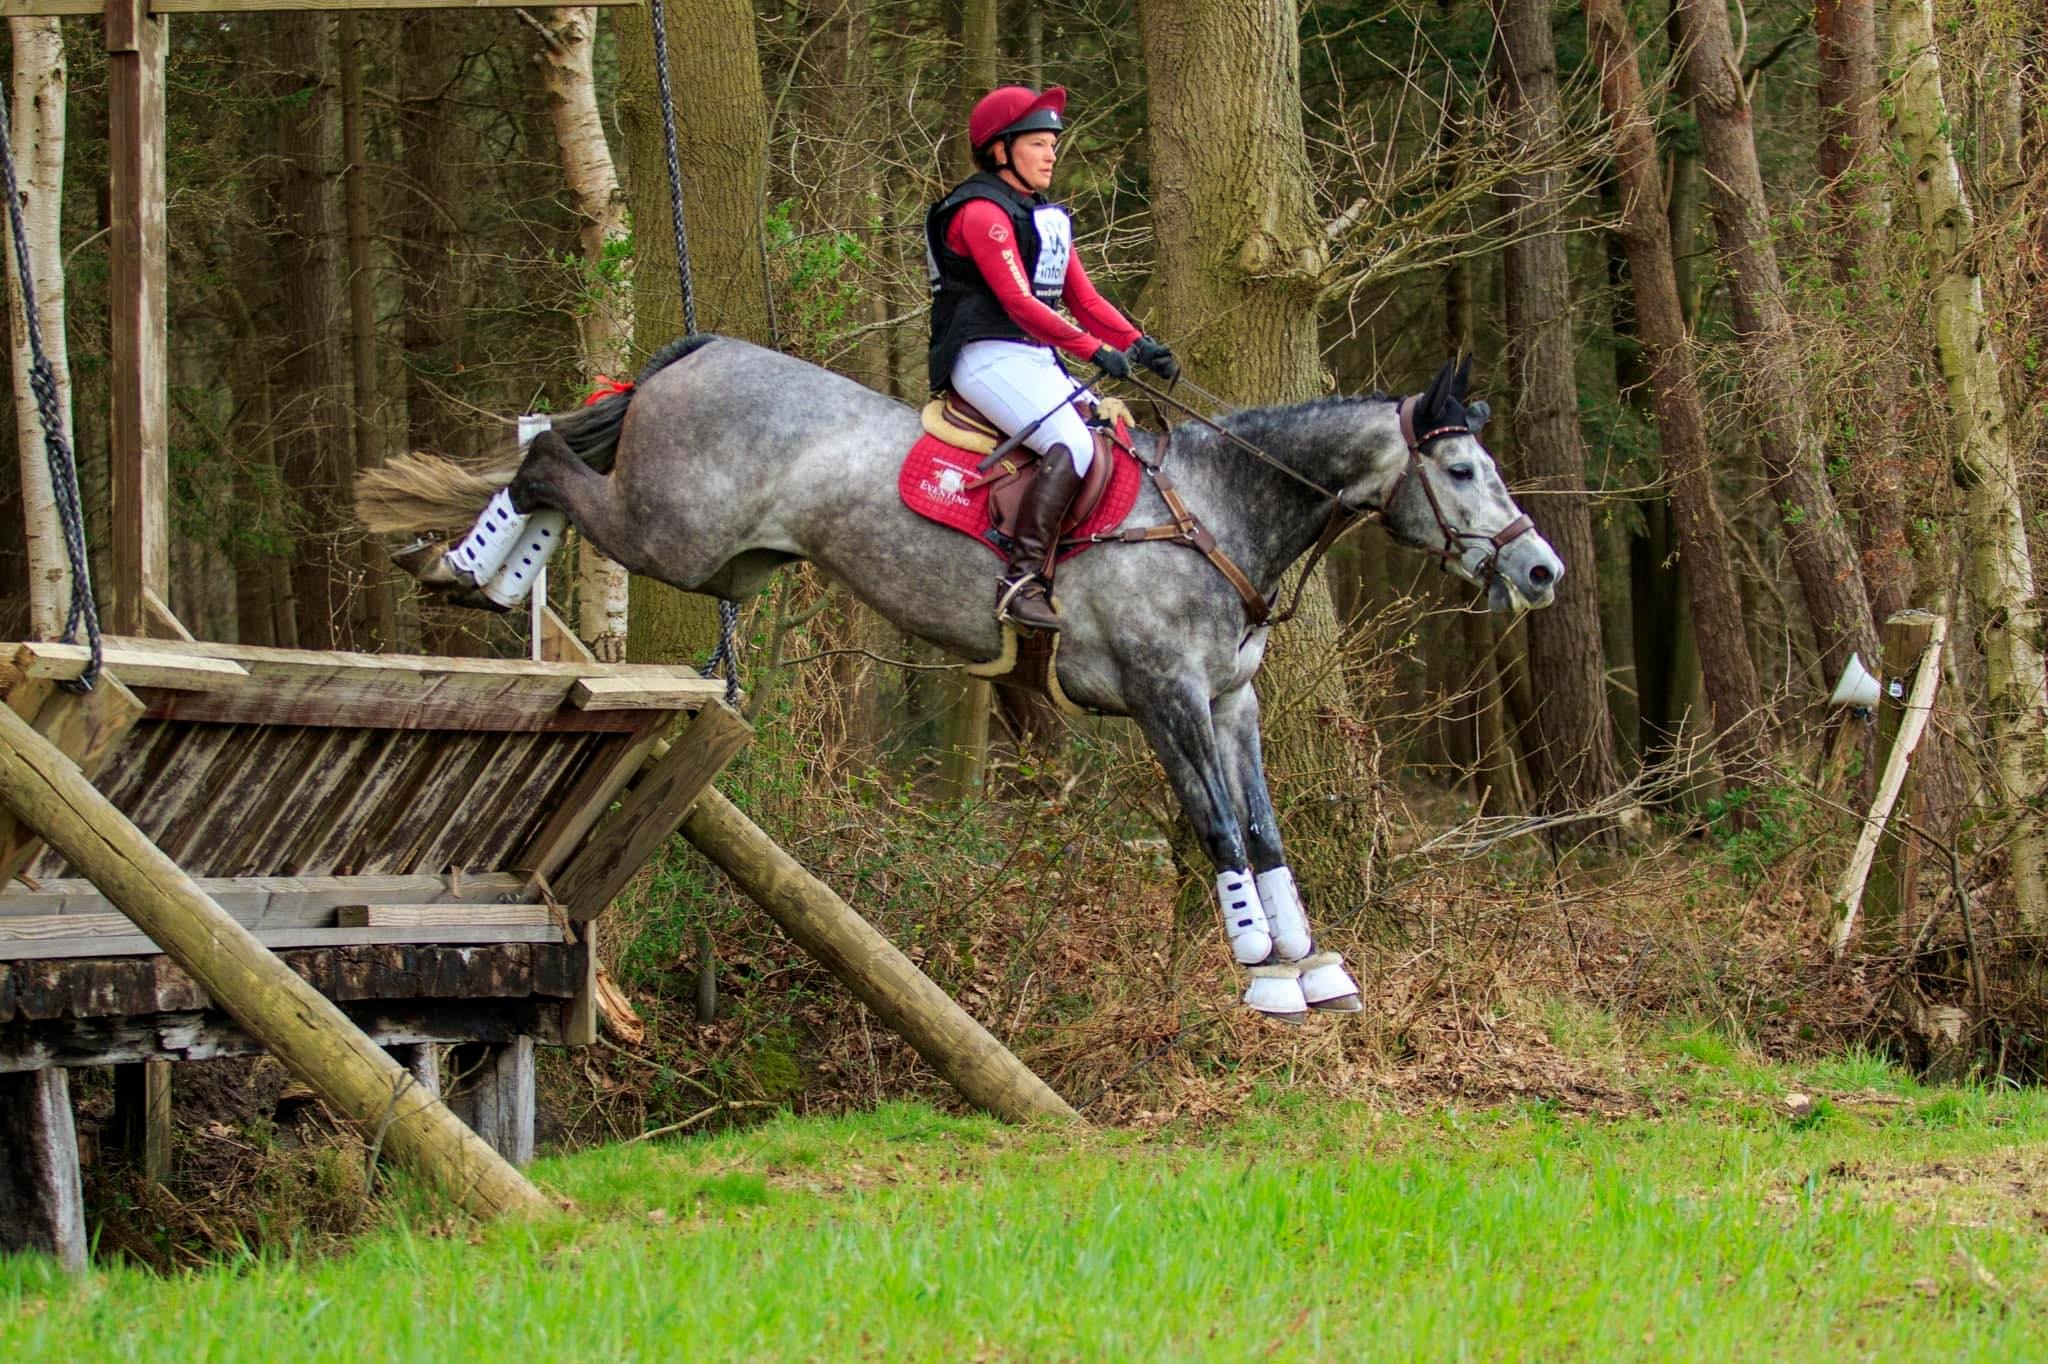 Eventing: Cross country equestrian jumping, An endurance test and one of the three phases of the sport of horse trials. 2050x1370 HD Wallpaper.